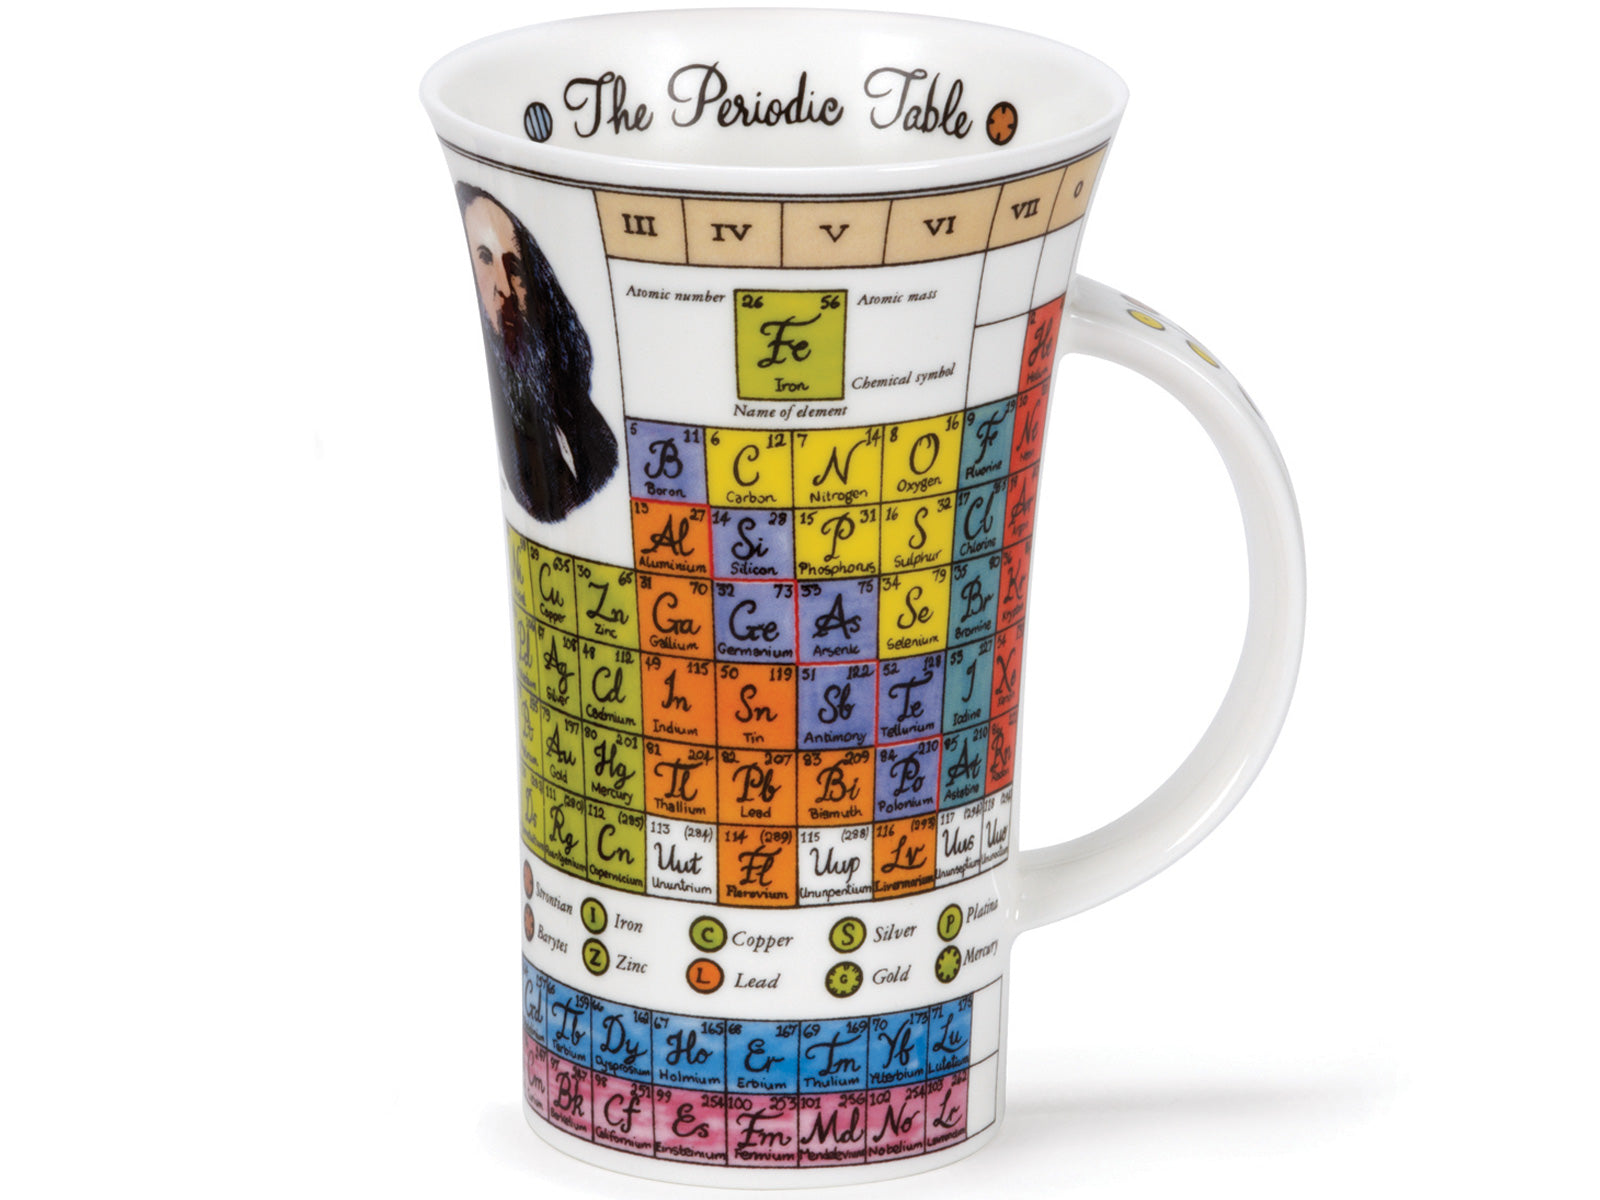 Dunoon Glencoe The Periodic Table Mug is a large fine bone china mug printed with a colour-coded periodic table around its entire exterior.